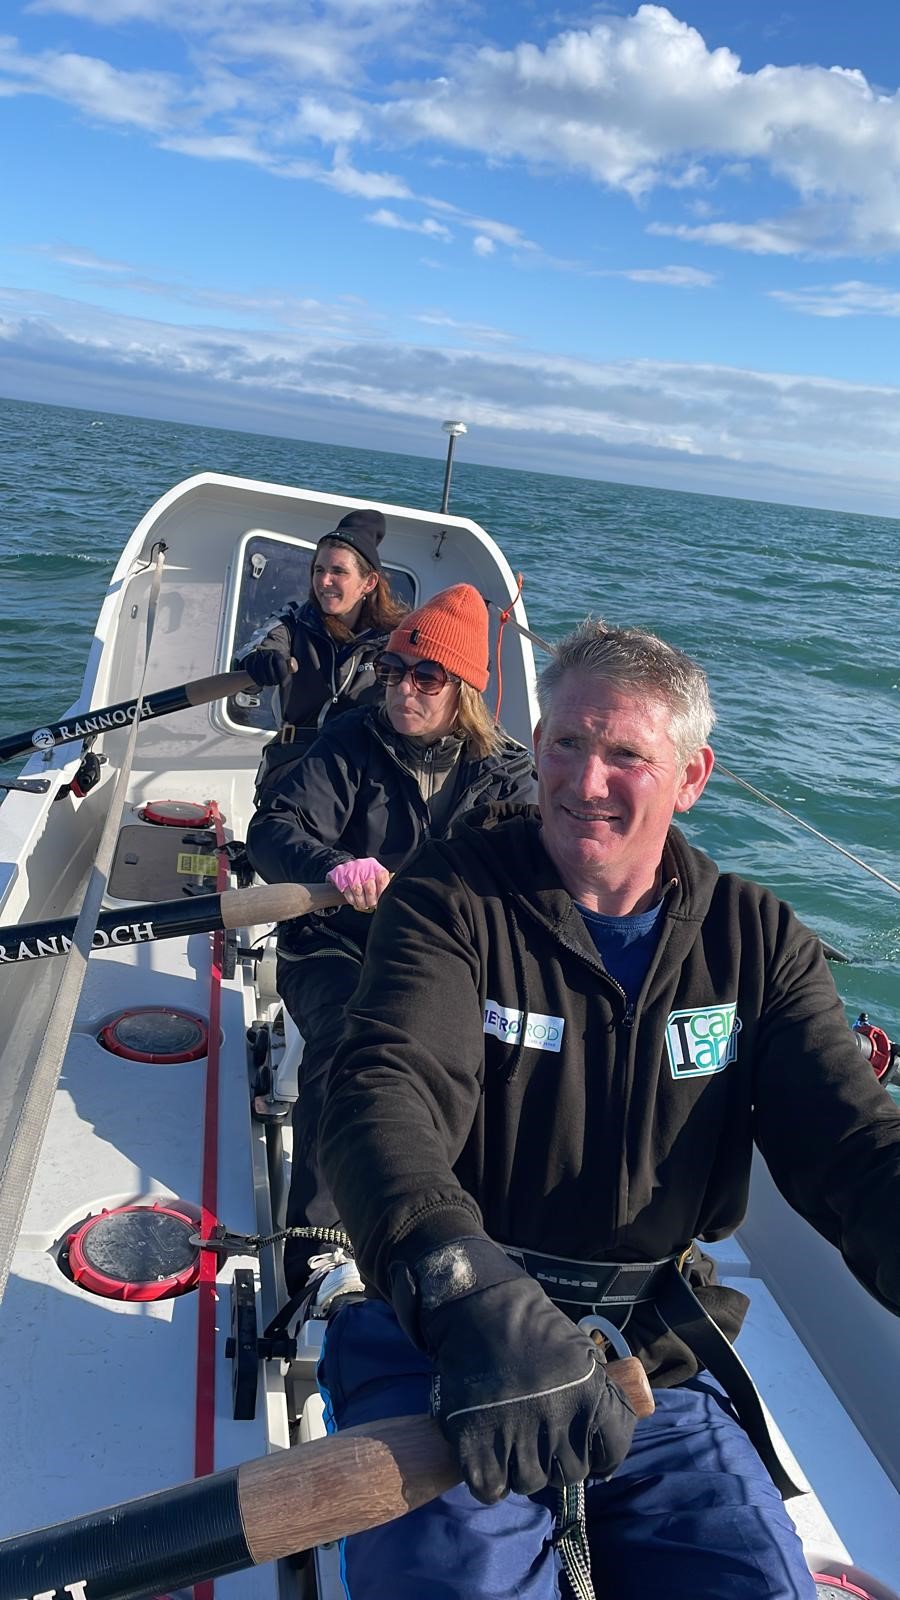 “I CAN AND I AM” CHARITY ROW JOURNEY UPDATES